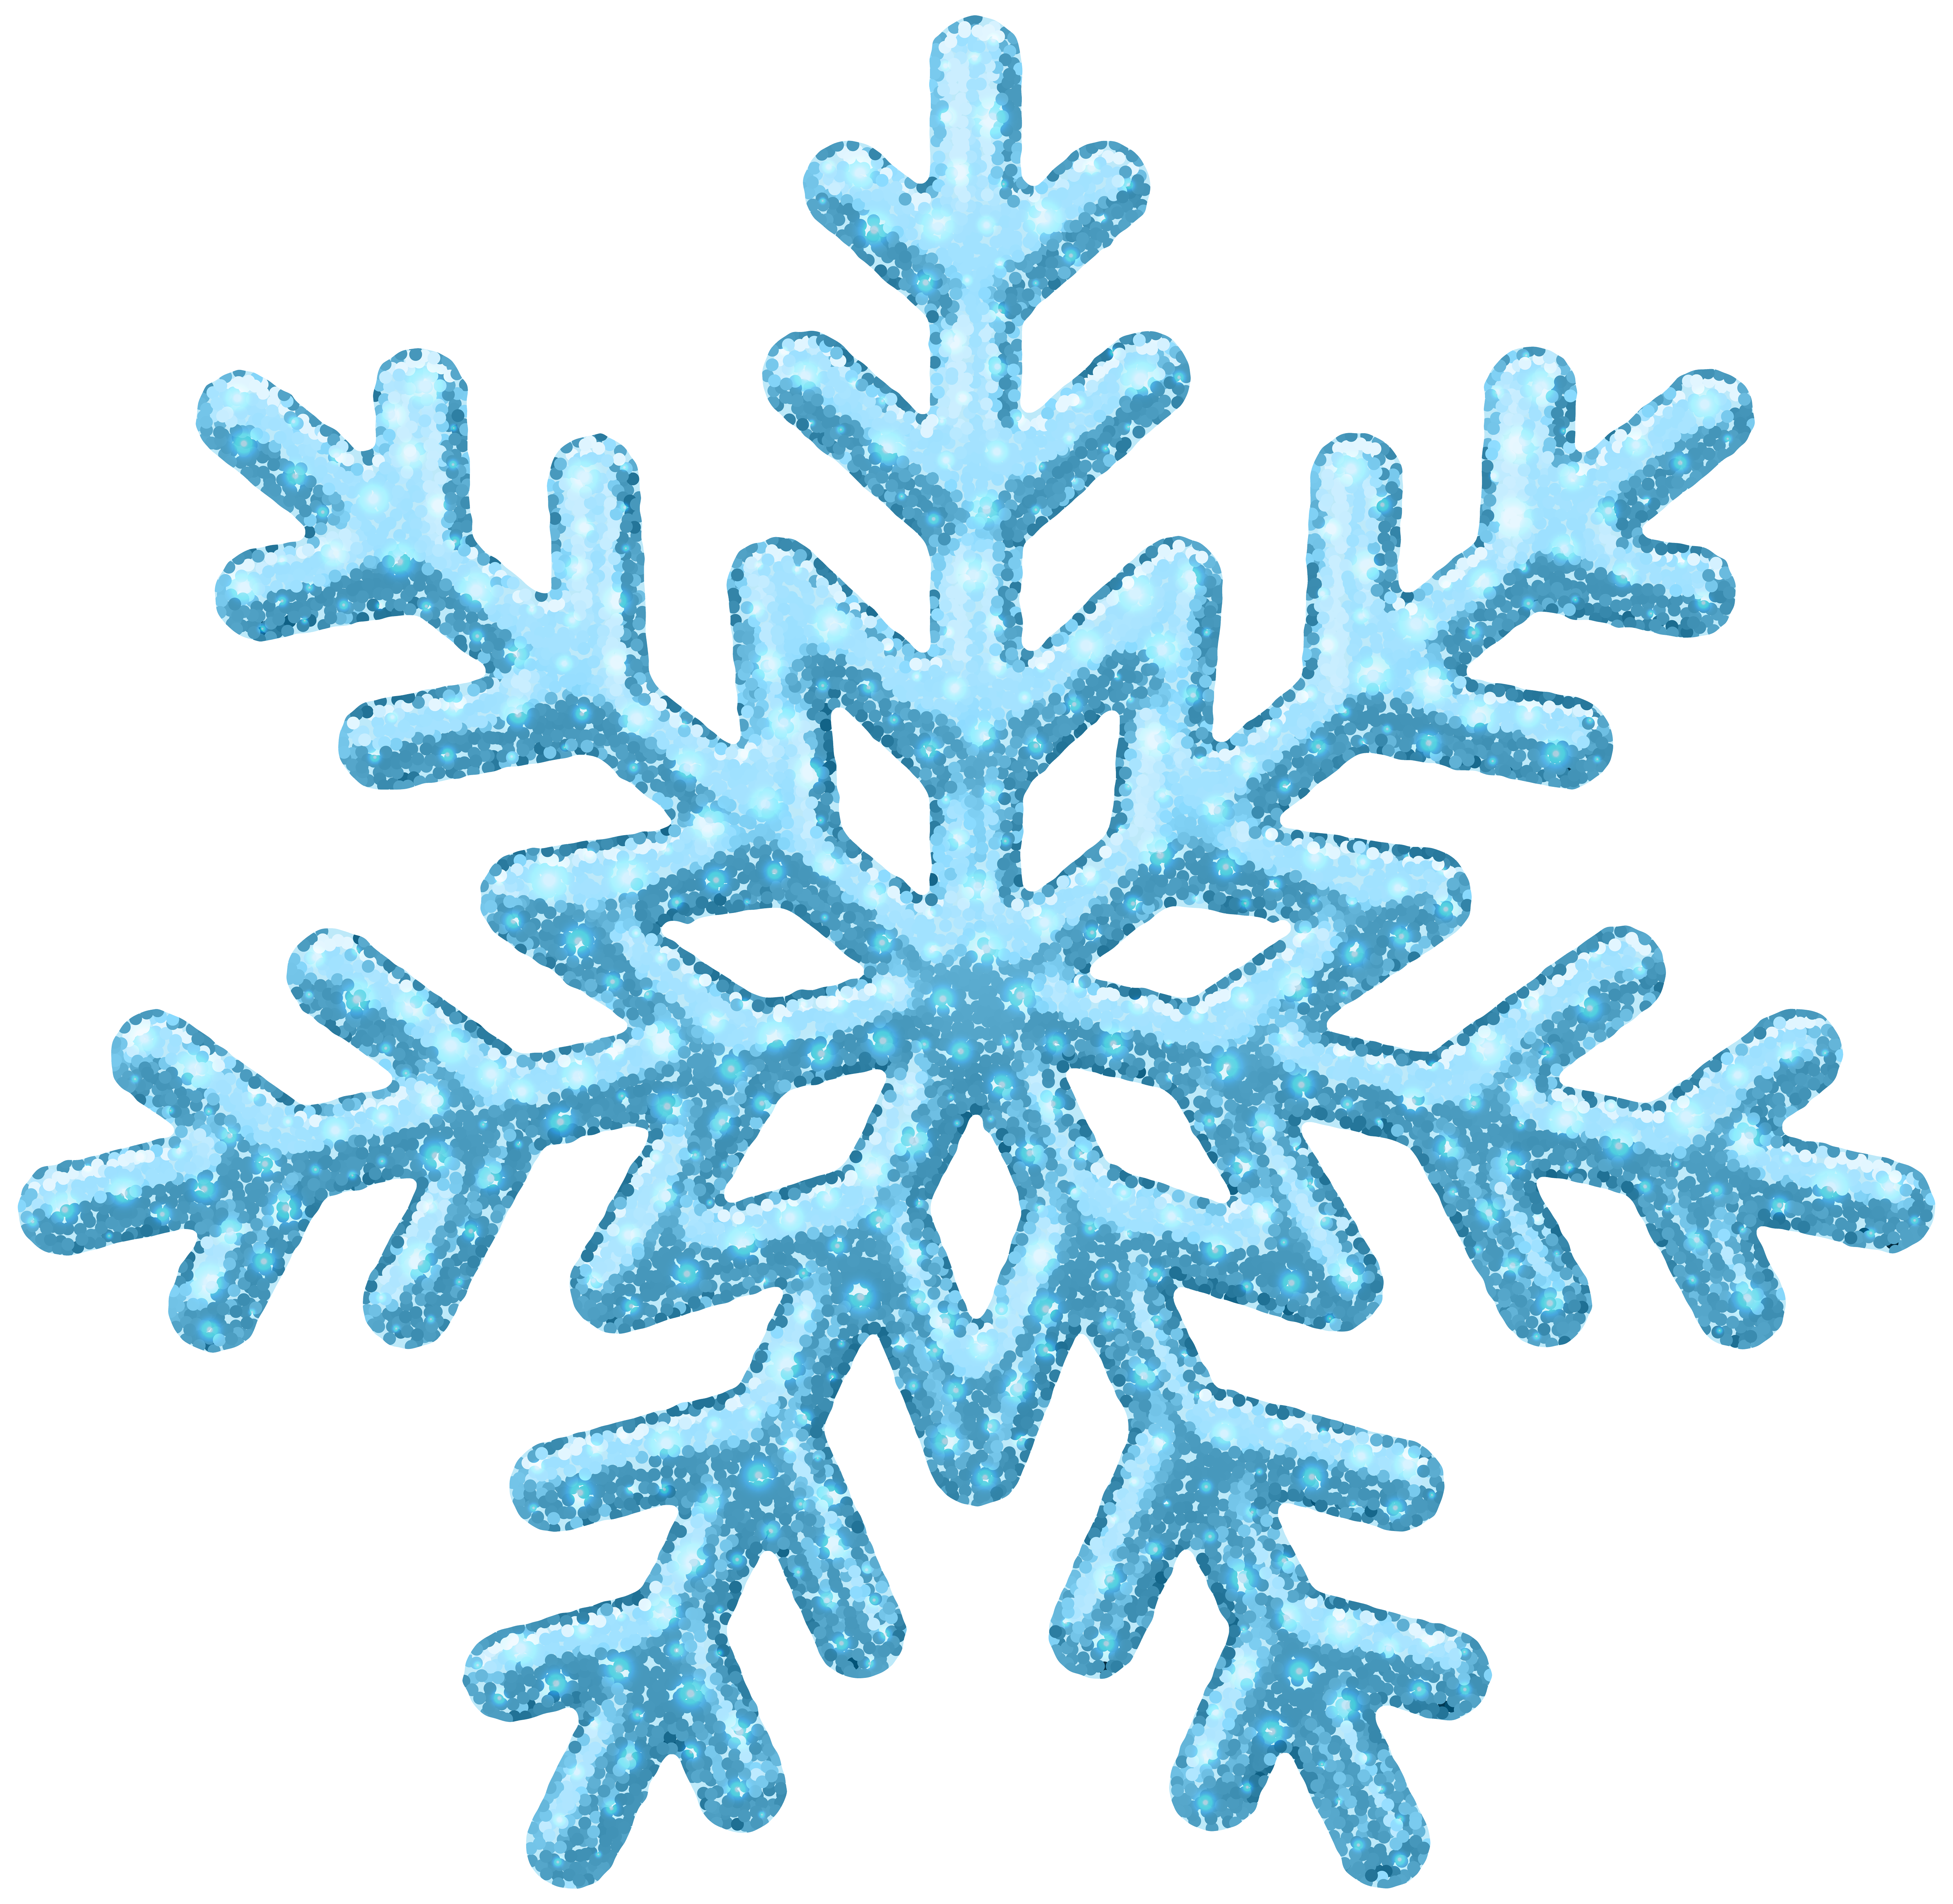 White Snowflake PNG Transparent Images Free Download